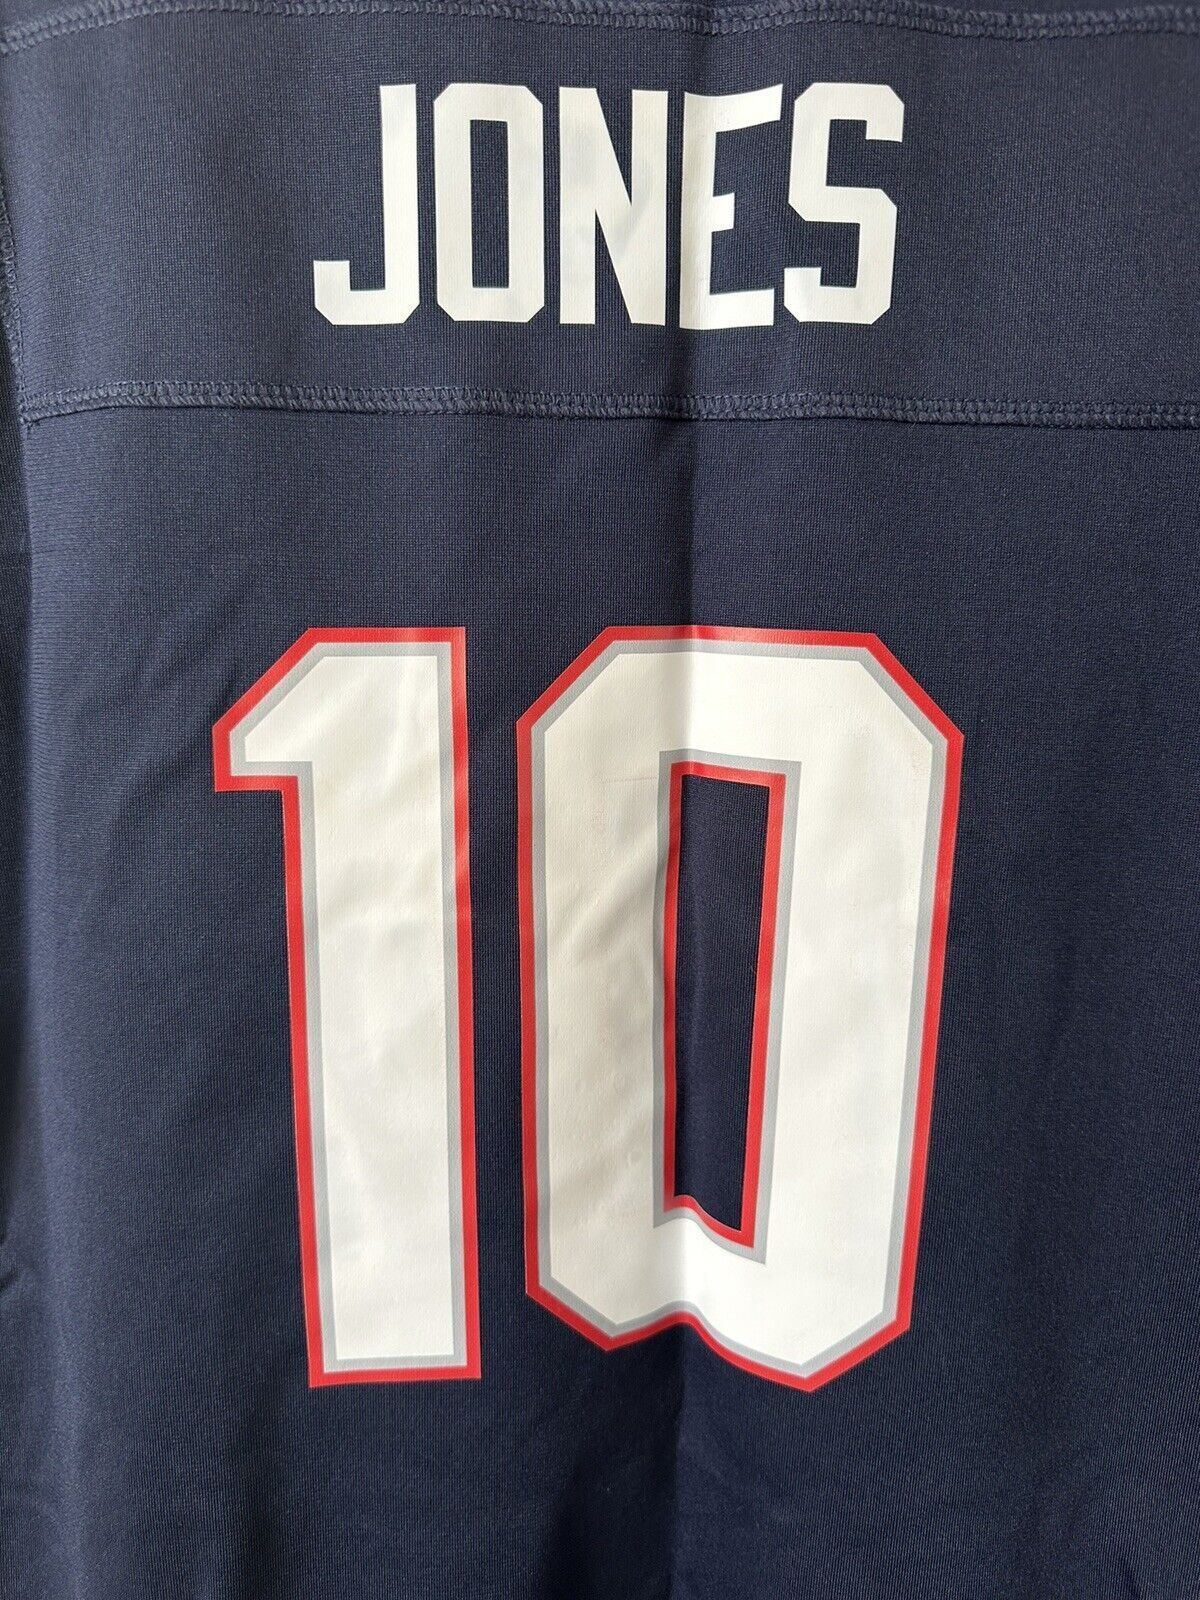 Nike NFL New England Patriots Game Jersey JONES 10 Youth Size 13-15 Years *DF*